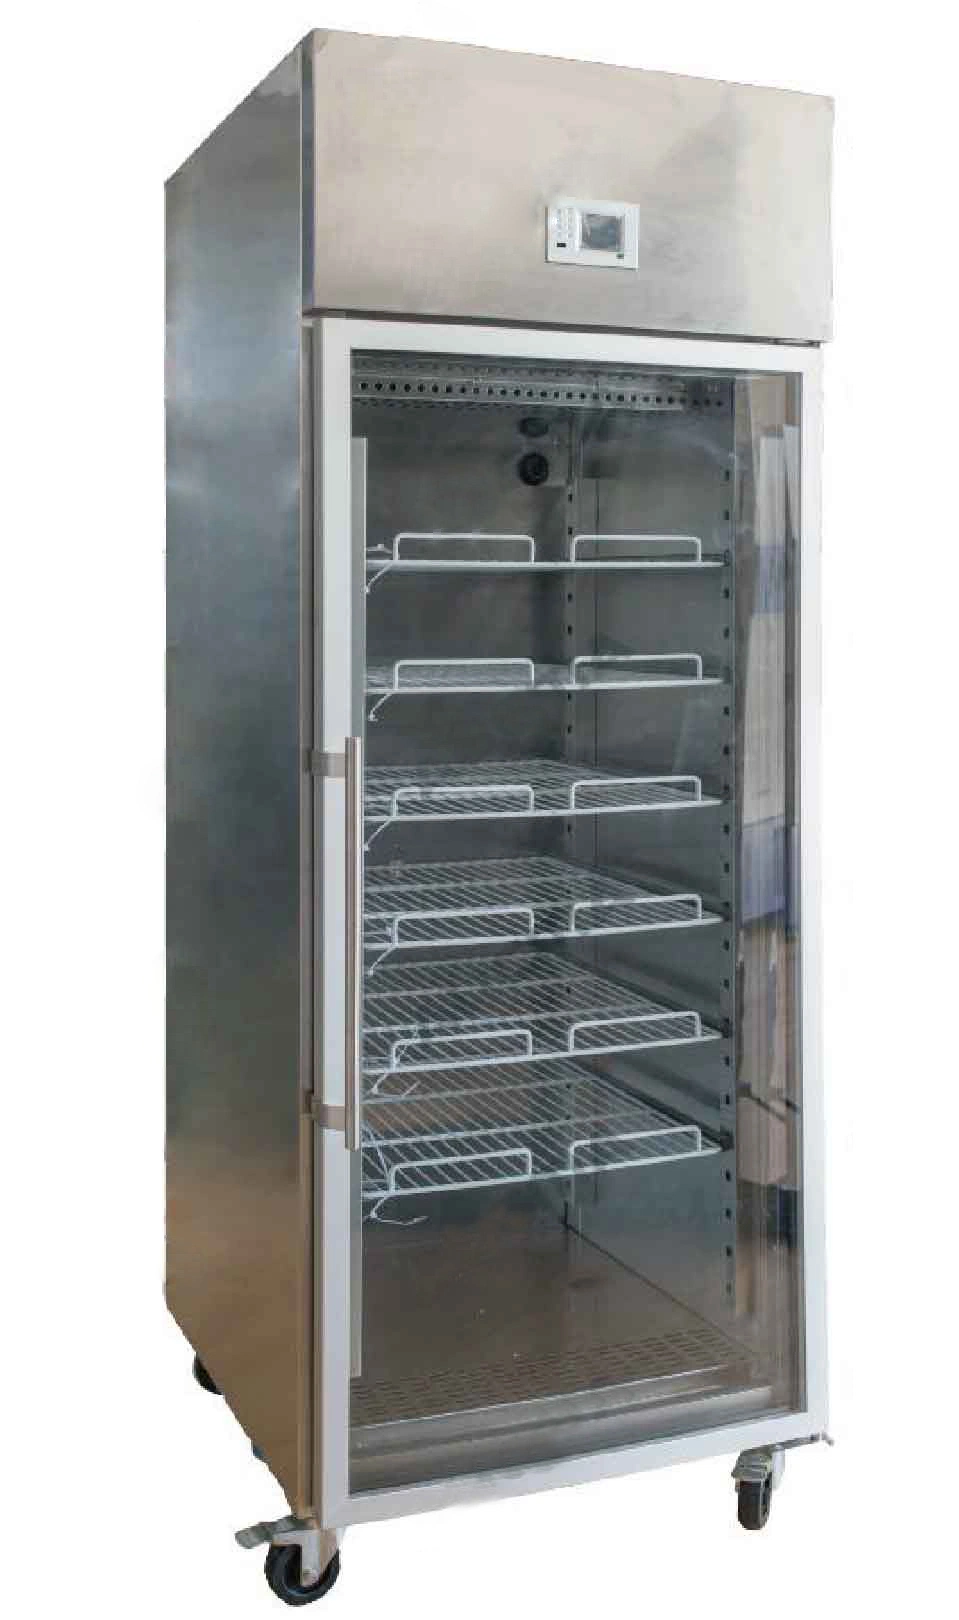 Sysmedical Medical Thermostatic Incubator Heating Fluid Warming Cabinet Used in Hospital and Laboratory